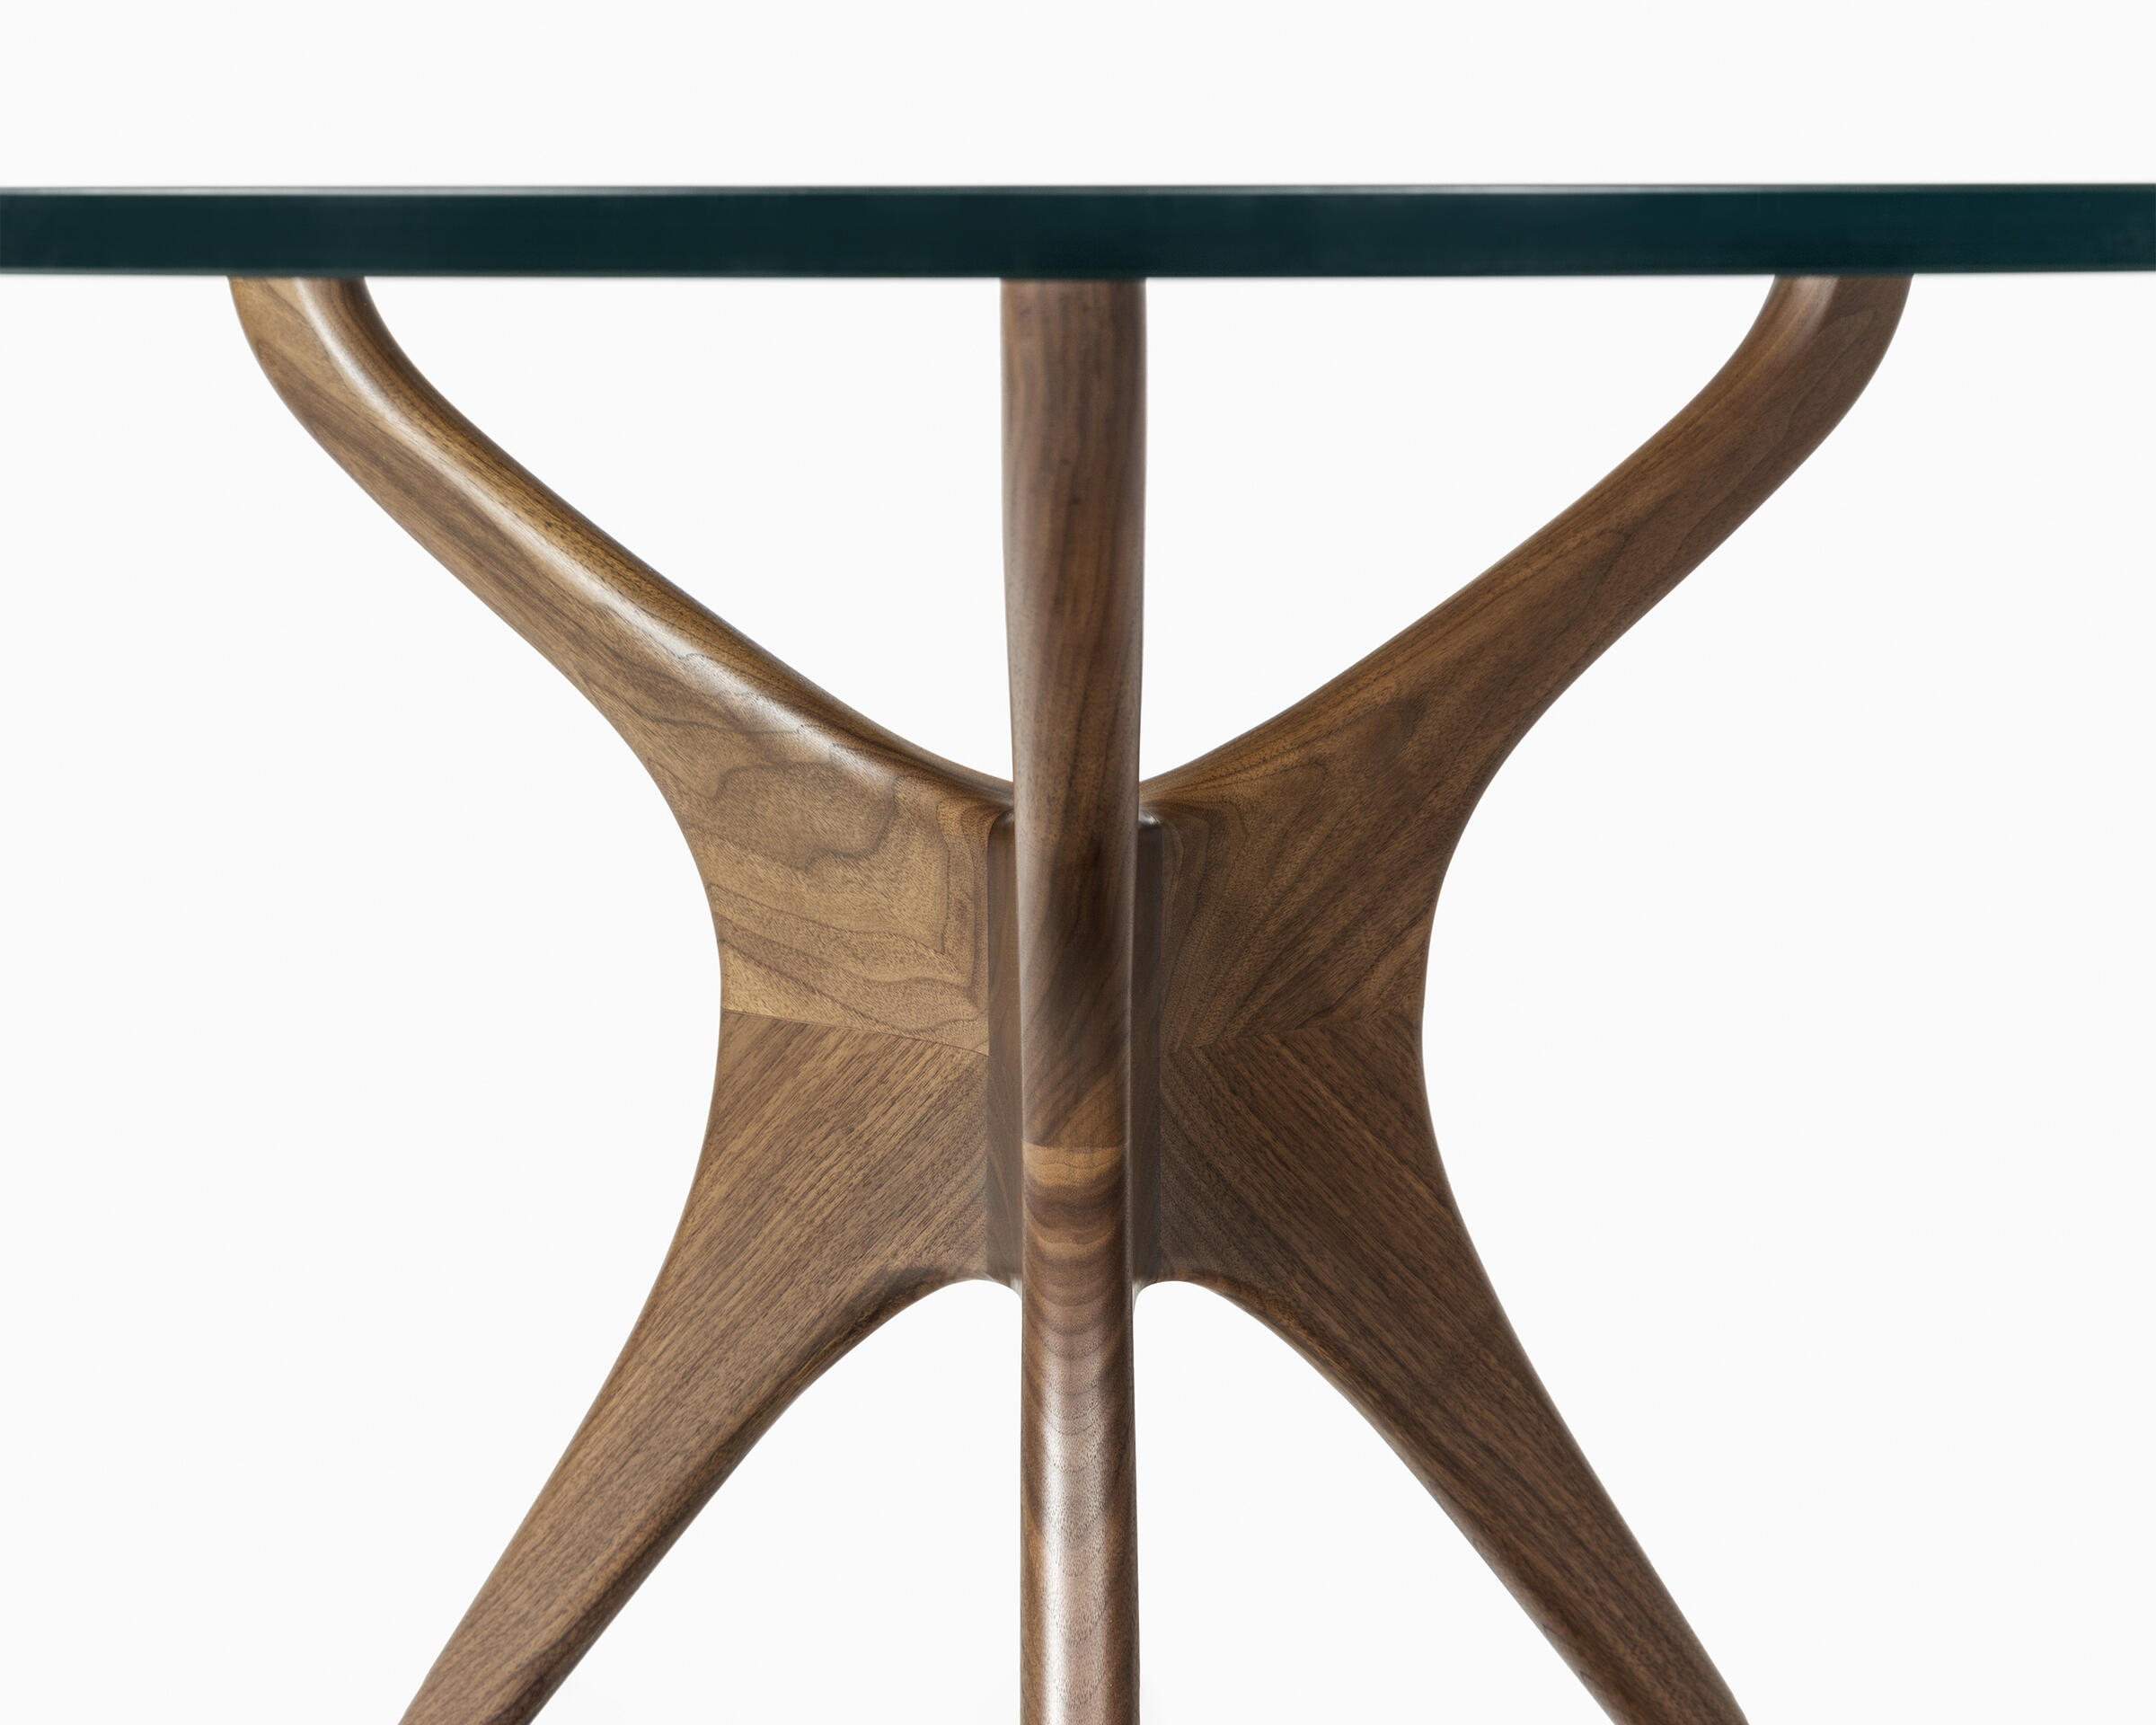 Sculpted Dining Table